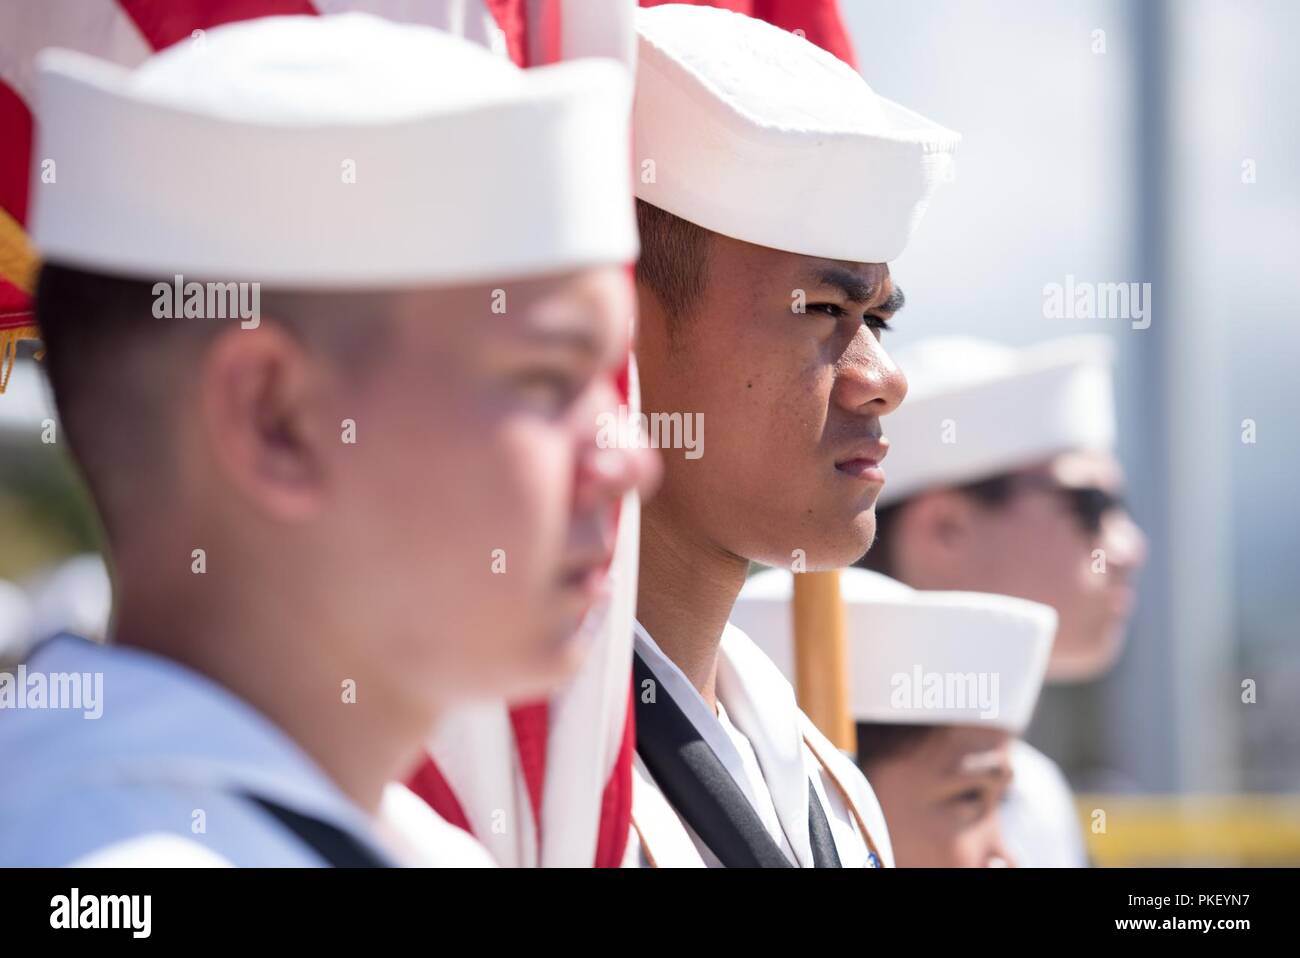 PEARL HARBOR (August 3, 2018) - The color guard displays the U.S. national ensign and the Hawaii state flag during the change of command ceremony for Los Angles-class fast-attack submarine USS Columbia (SSN 771) on the historic submarine piers at Joint Base Pearl Harbor-Hickam, August 3. Cmdr. Tyler Forrest relieved Cmdr. Dave Edgerton as Columbia’s commanding officer. Stock Photo